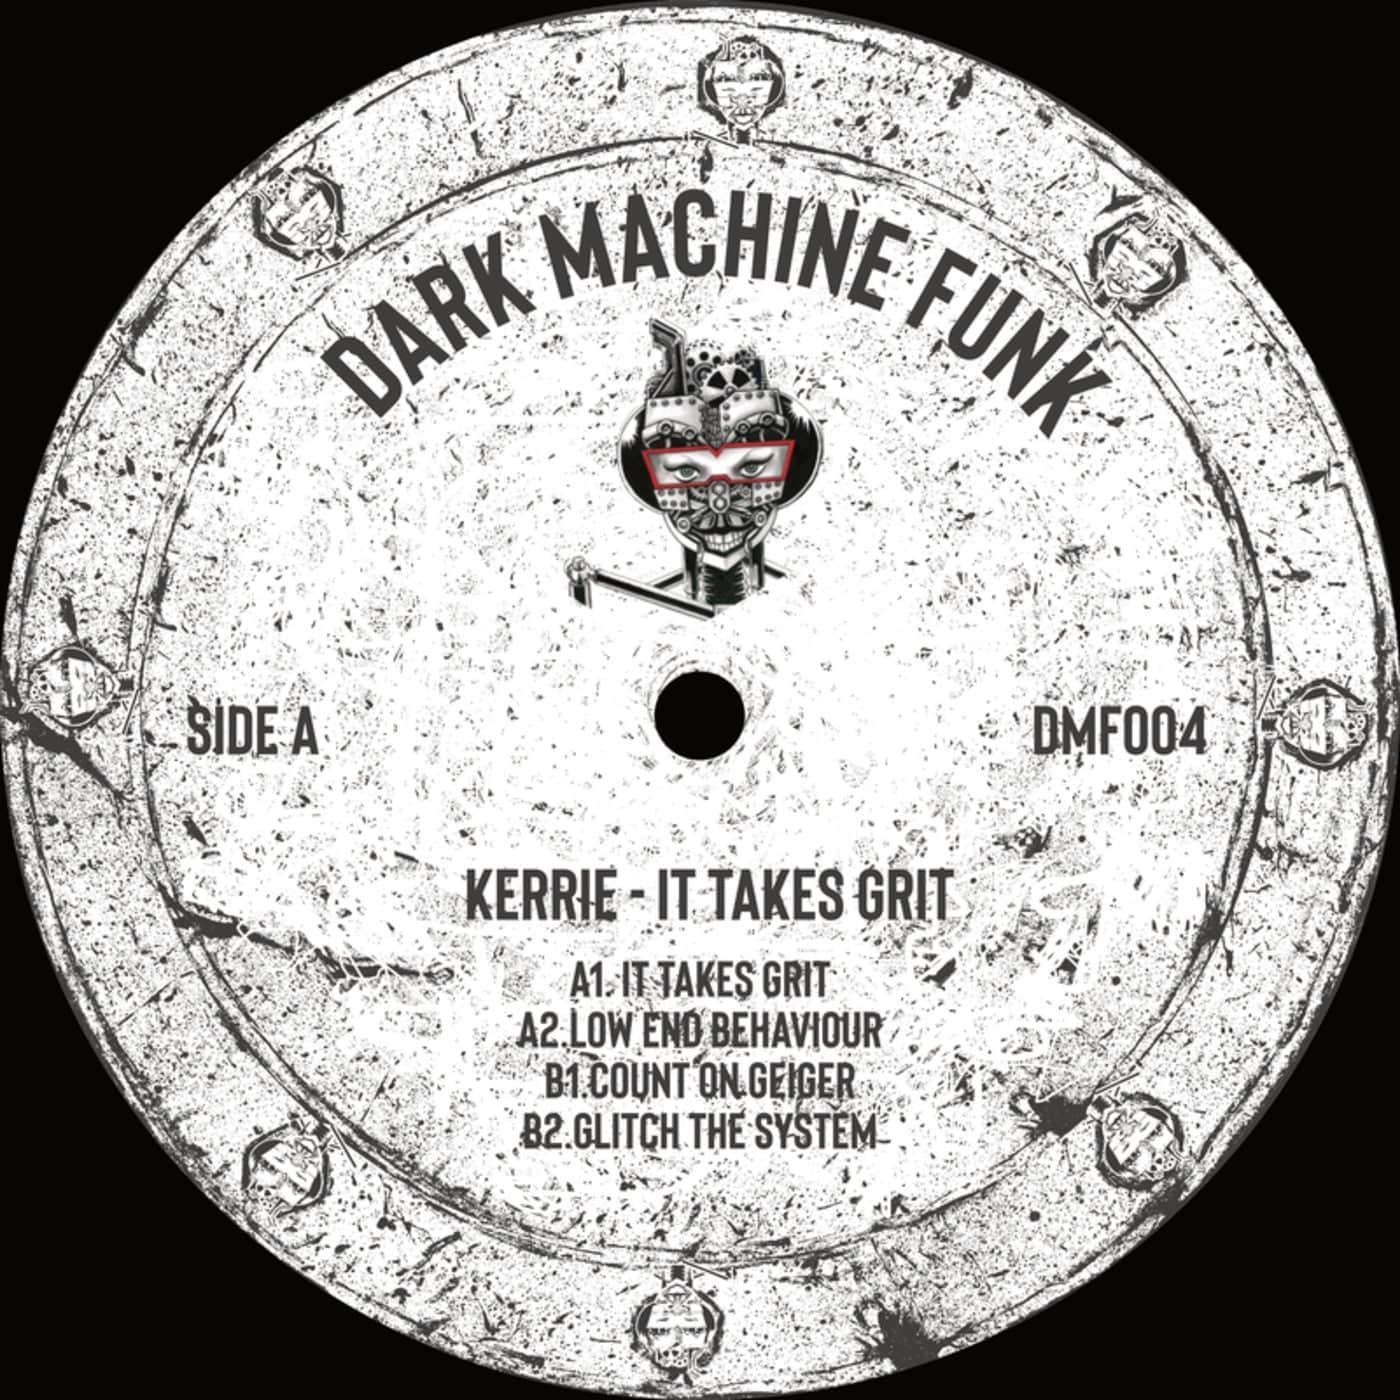 image cover: It Takes Grit by Kerrie on Dark Machine Funk